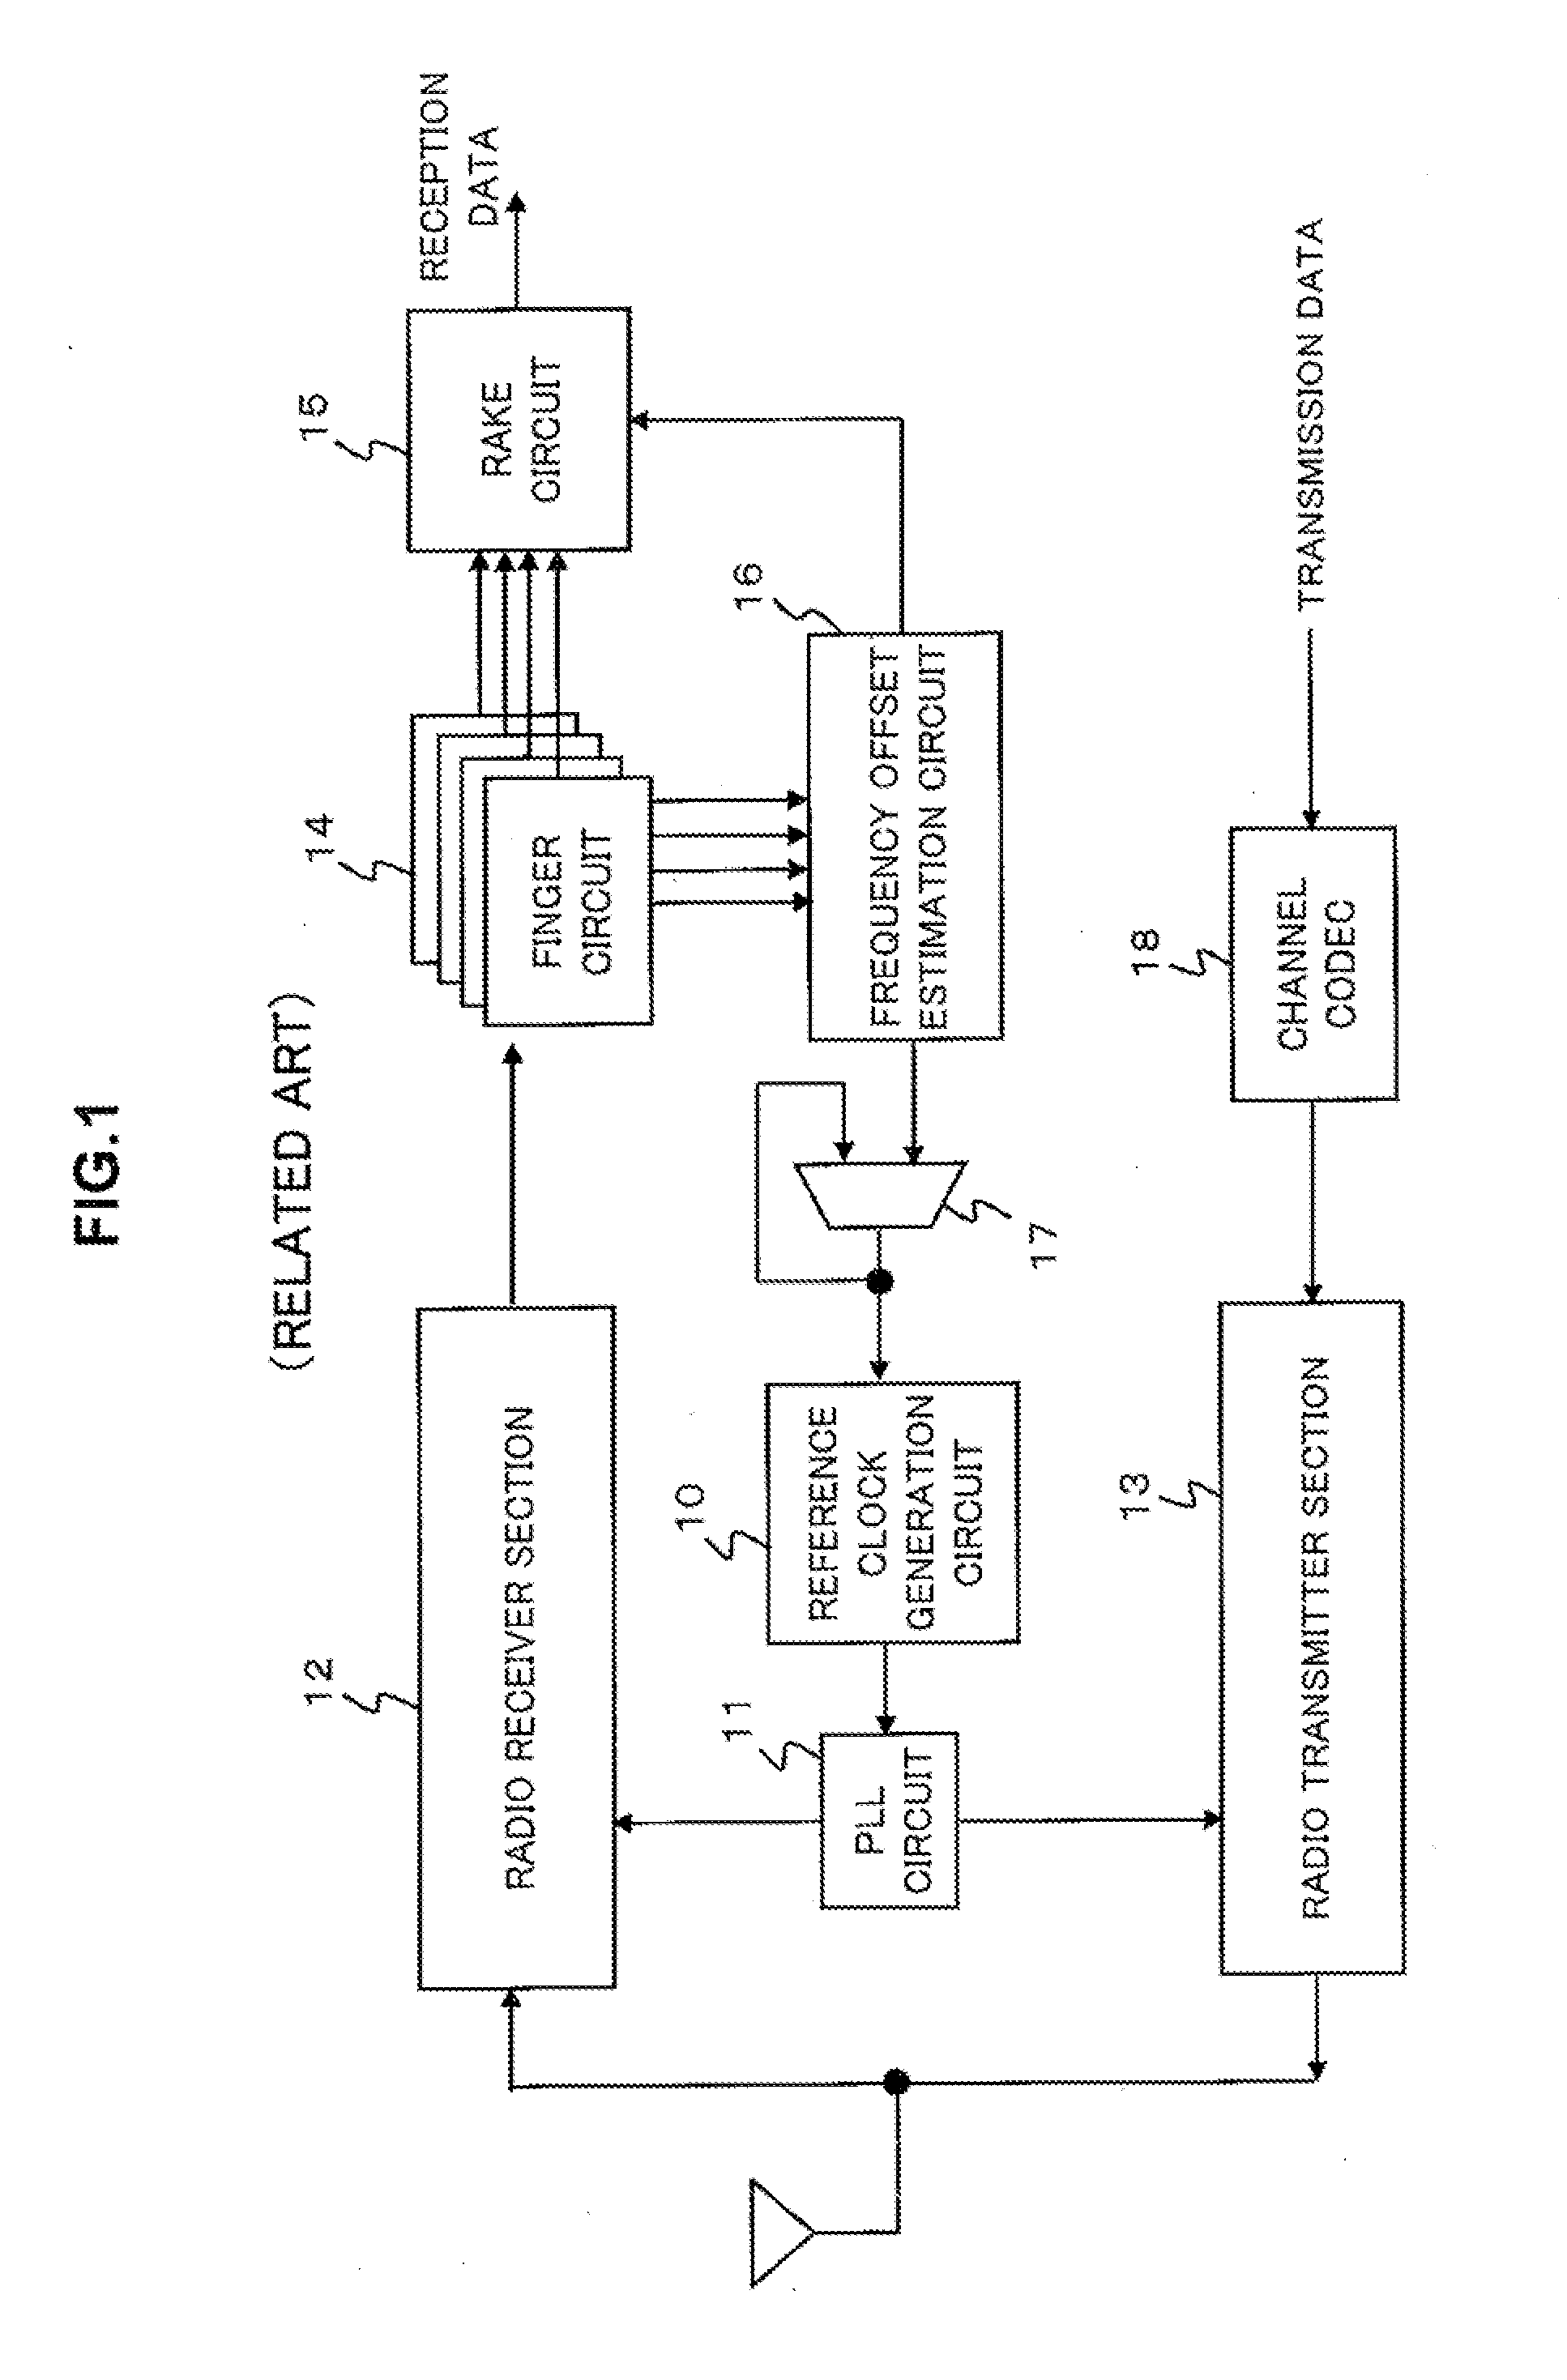 Mobile radio communication system, mobile communication device, and frequency control method thereof